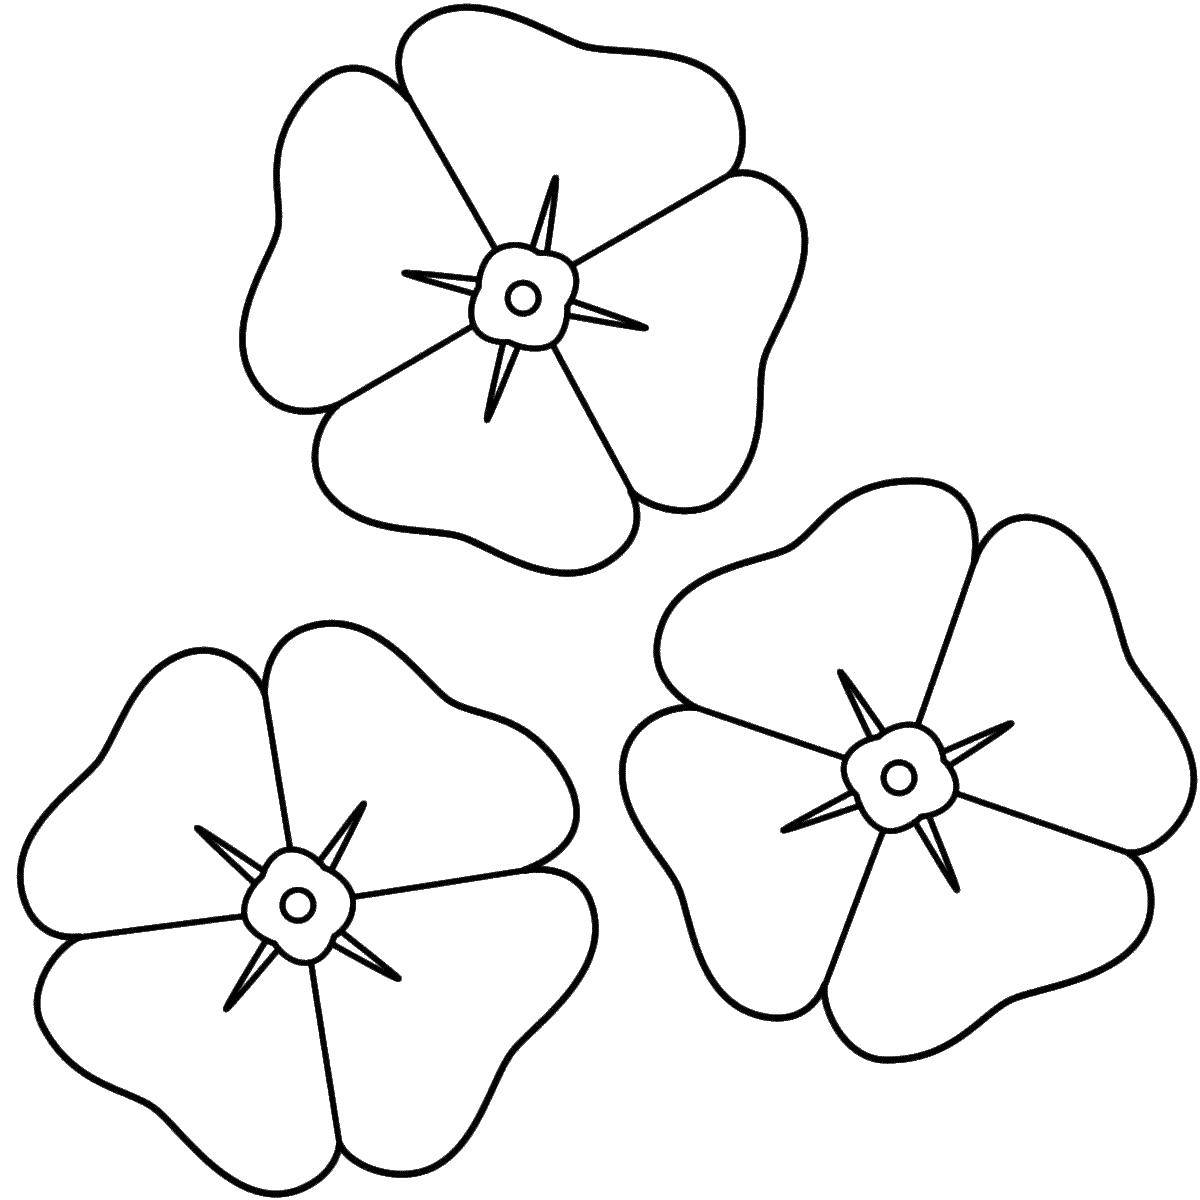 Coloring Three flowers. Category plants. Tags:  Flowers.